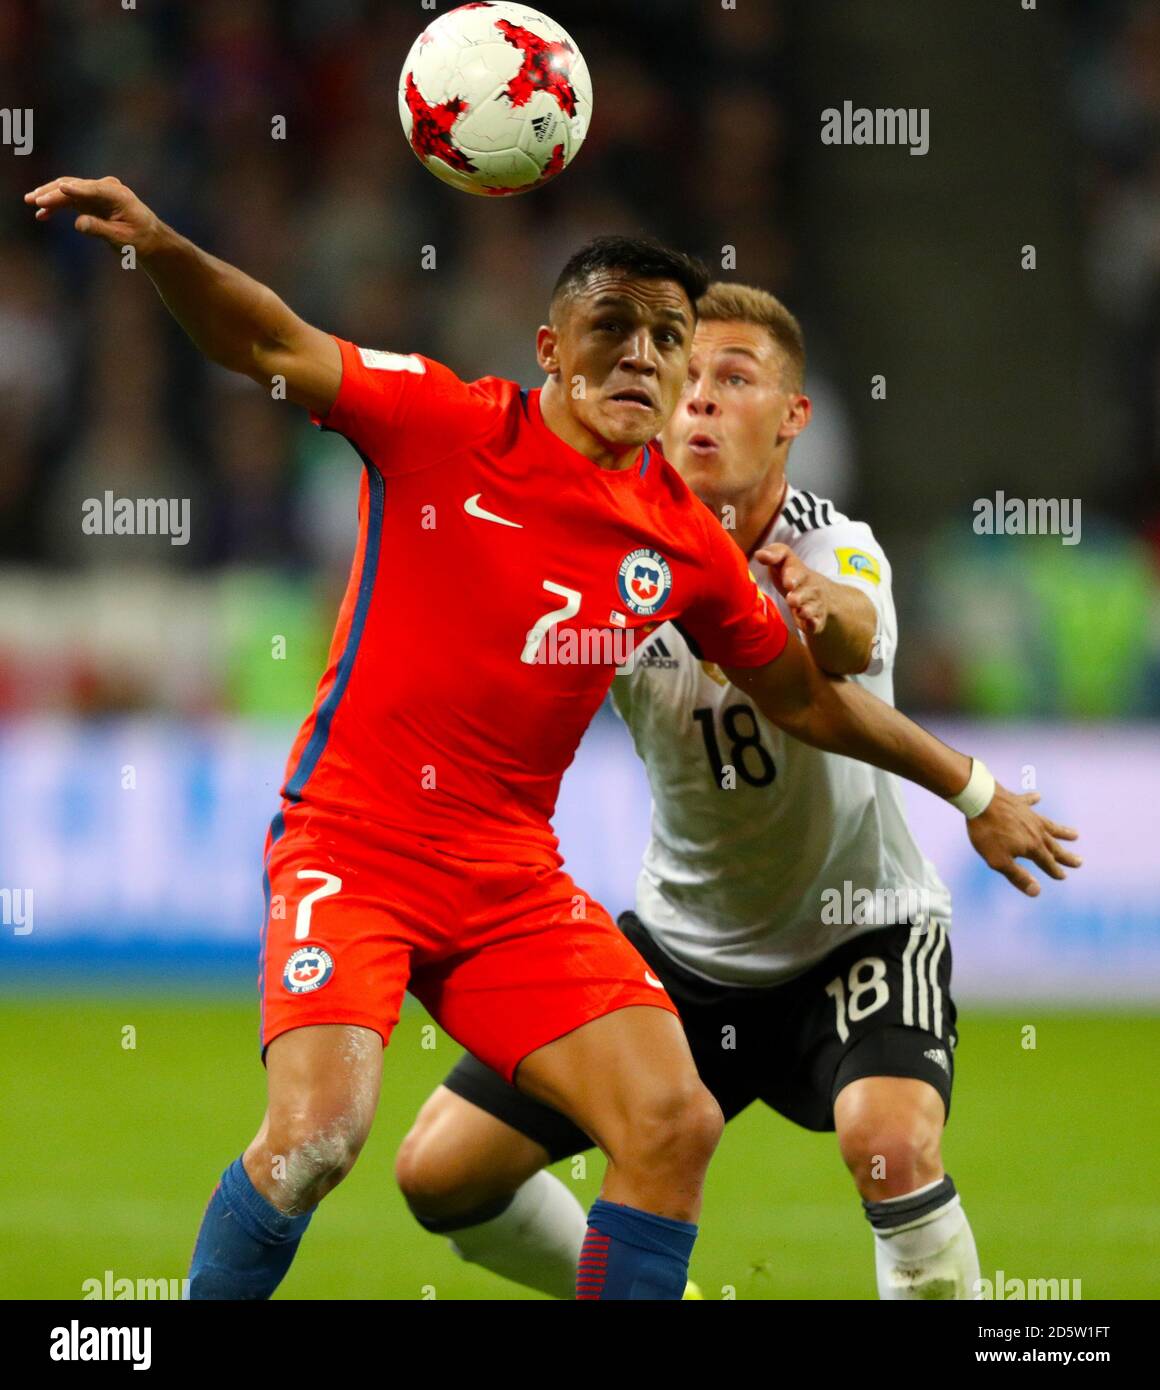 Germany's Joshua Kimmich (right) and Chile's Alexis Sanchez battle for the ball Stock Photo